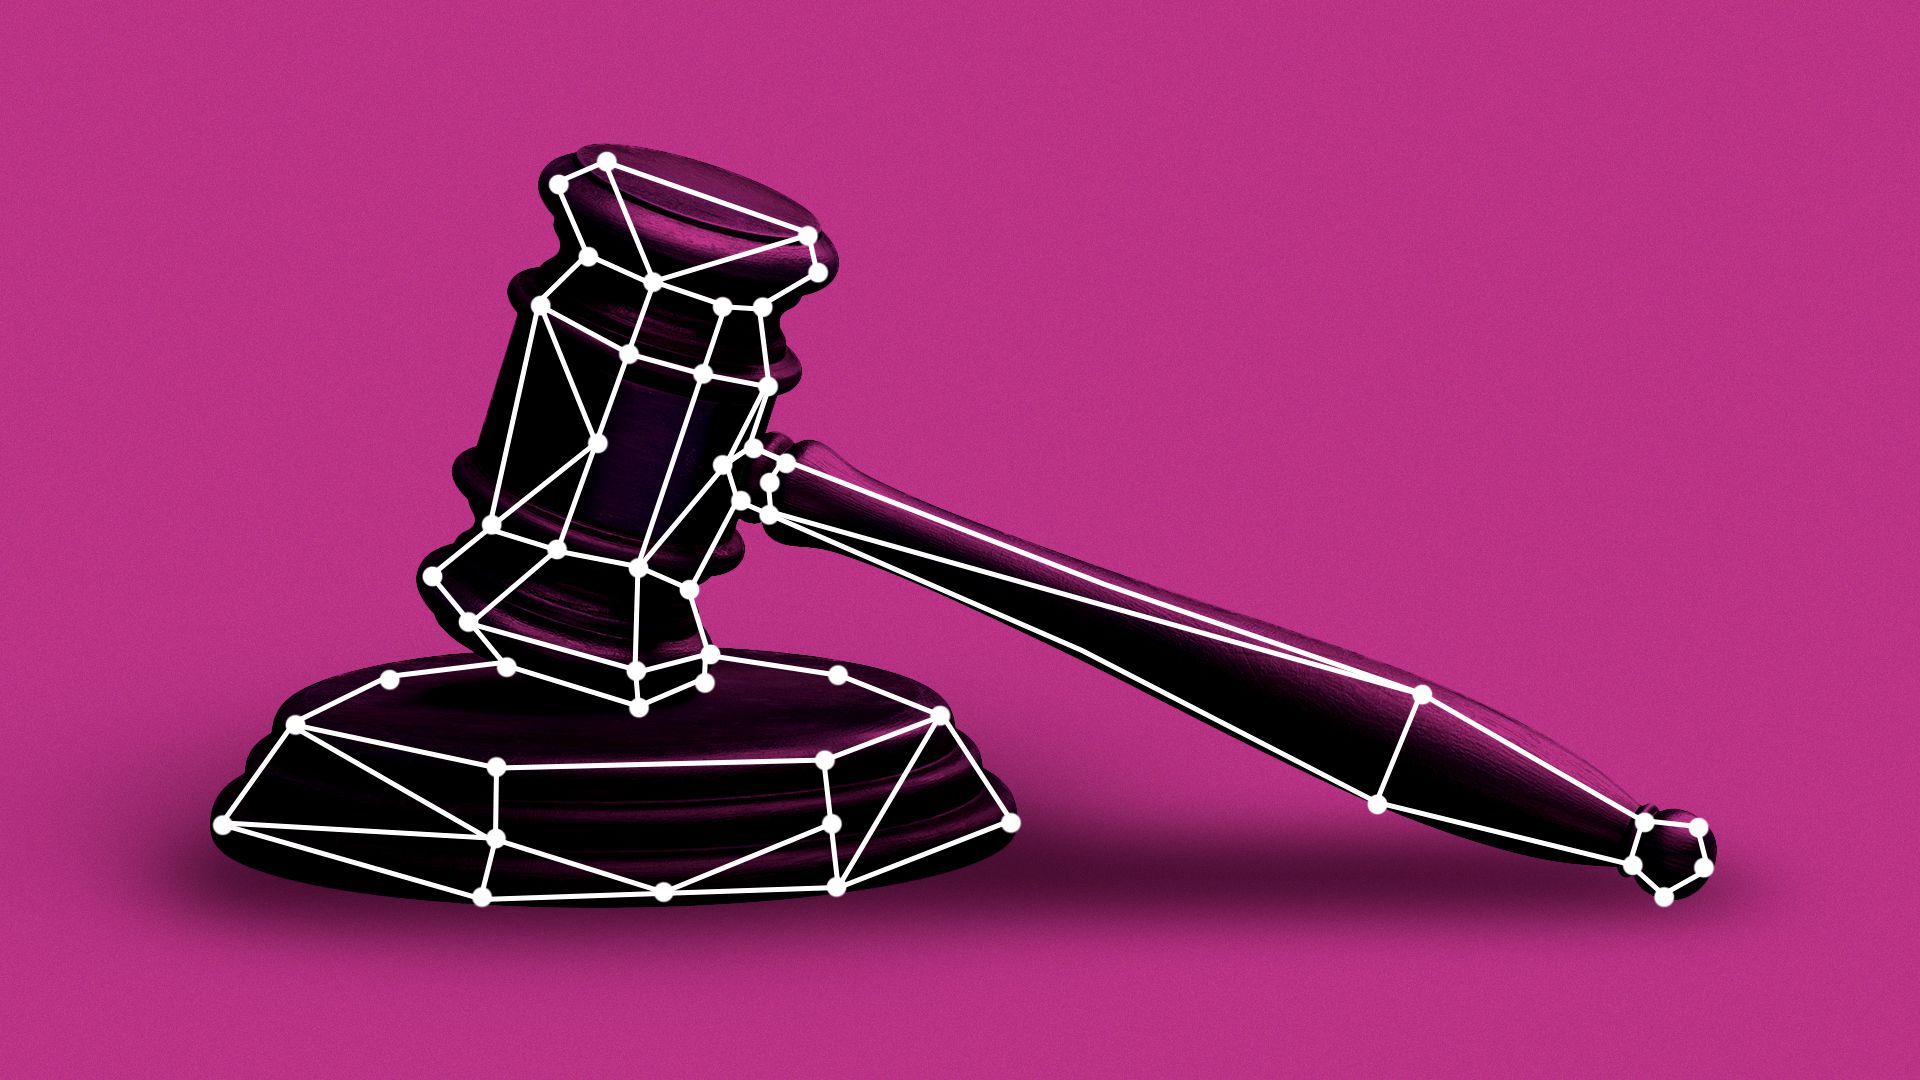 Illustration of a gavel with a facial recognition frame tracing its shape